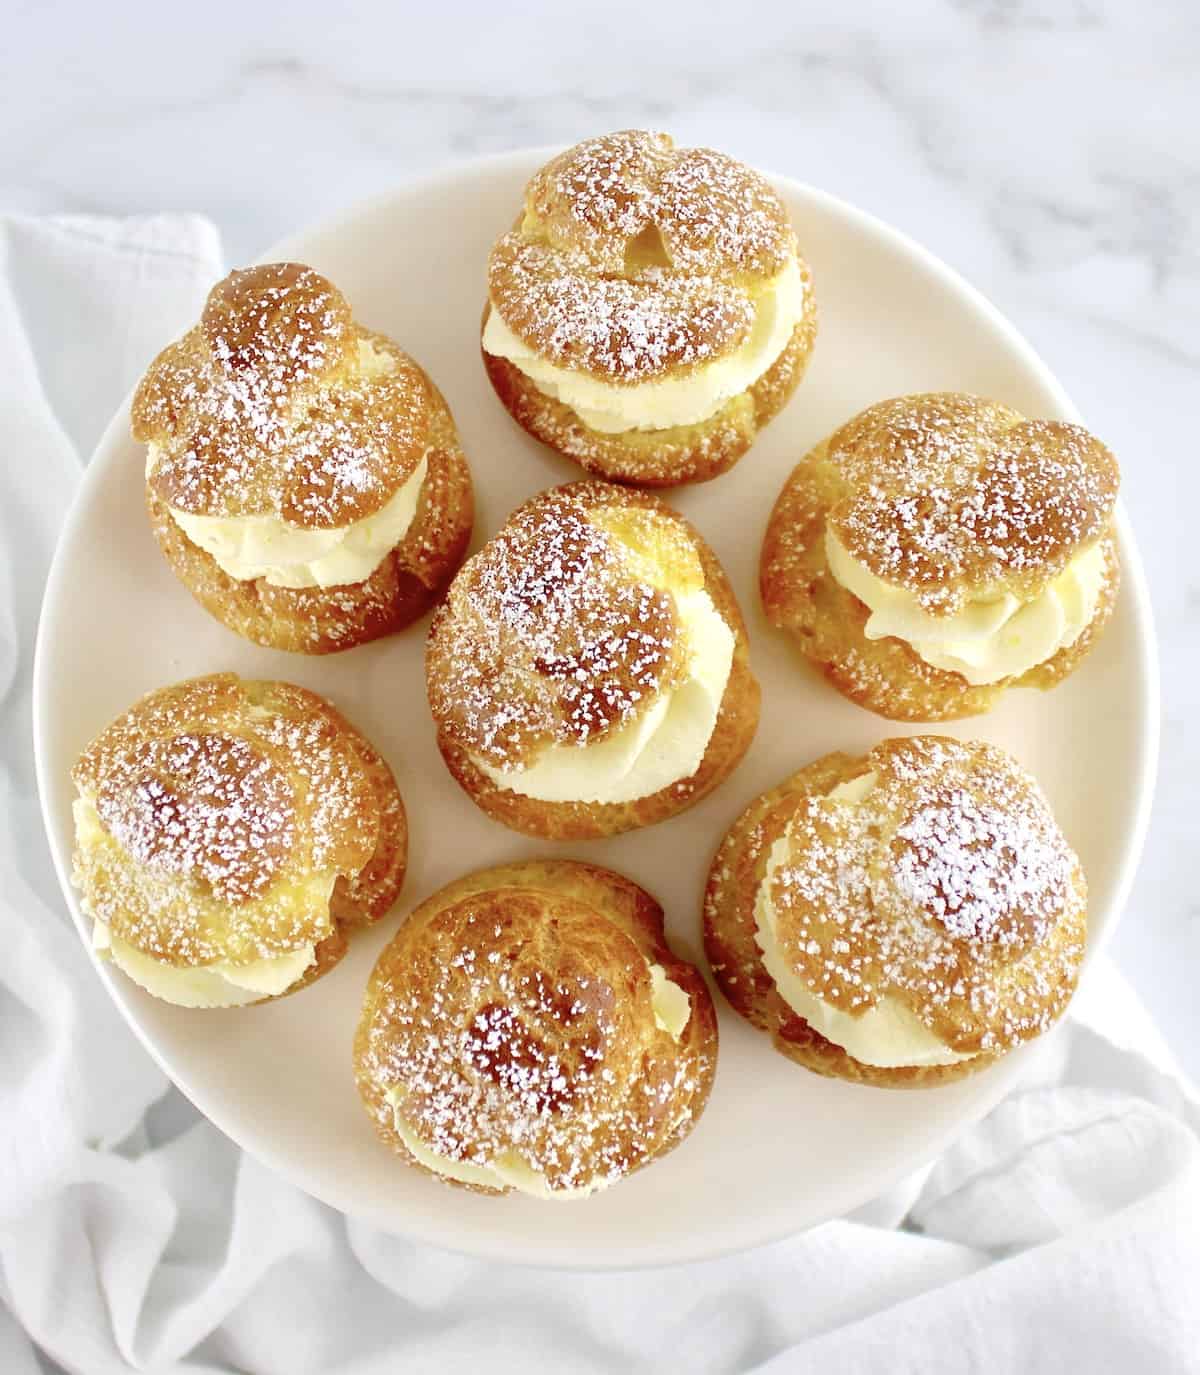 overhead view of 7 cream puffs on white round plate with powdered sugar on top